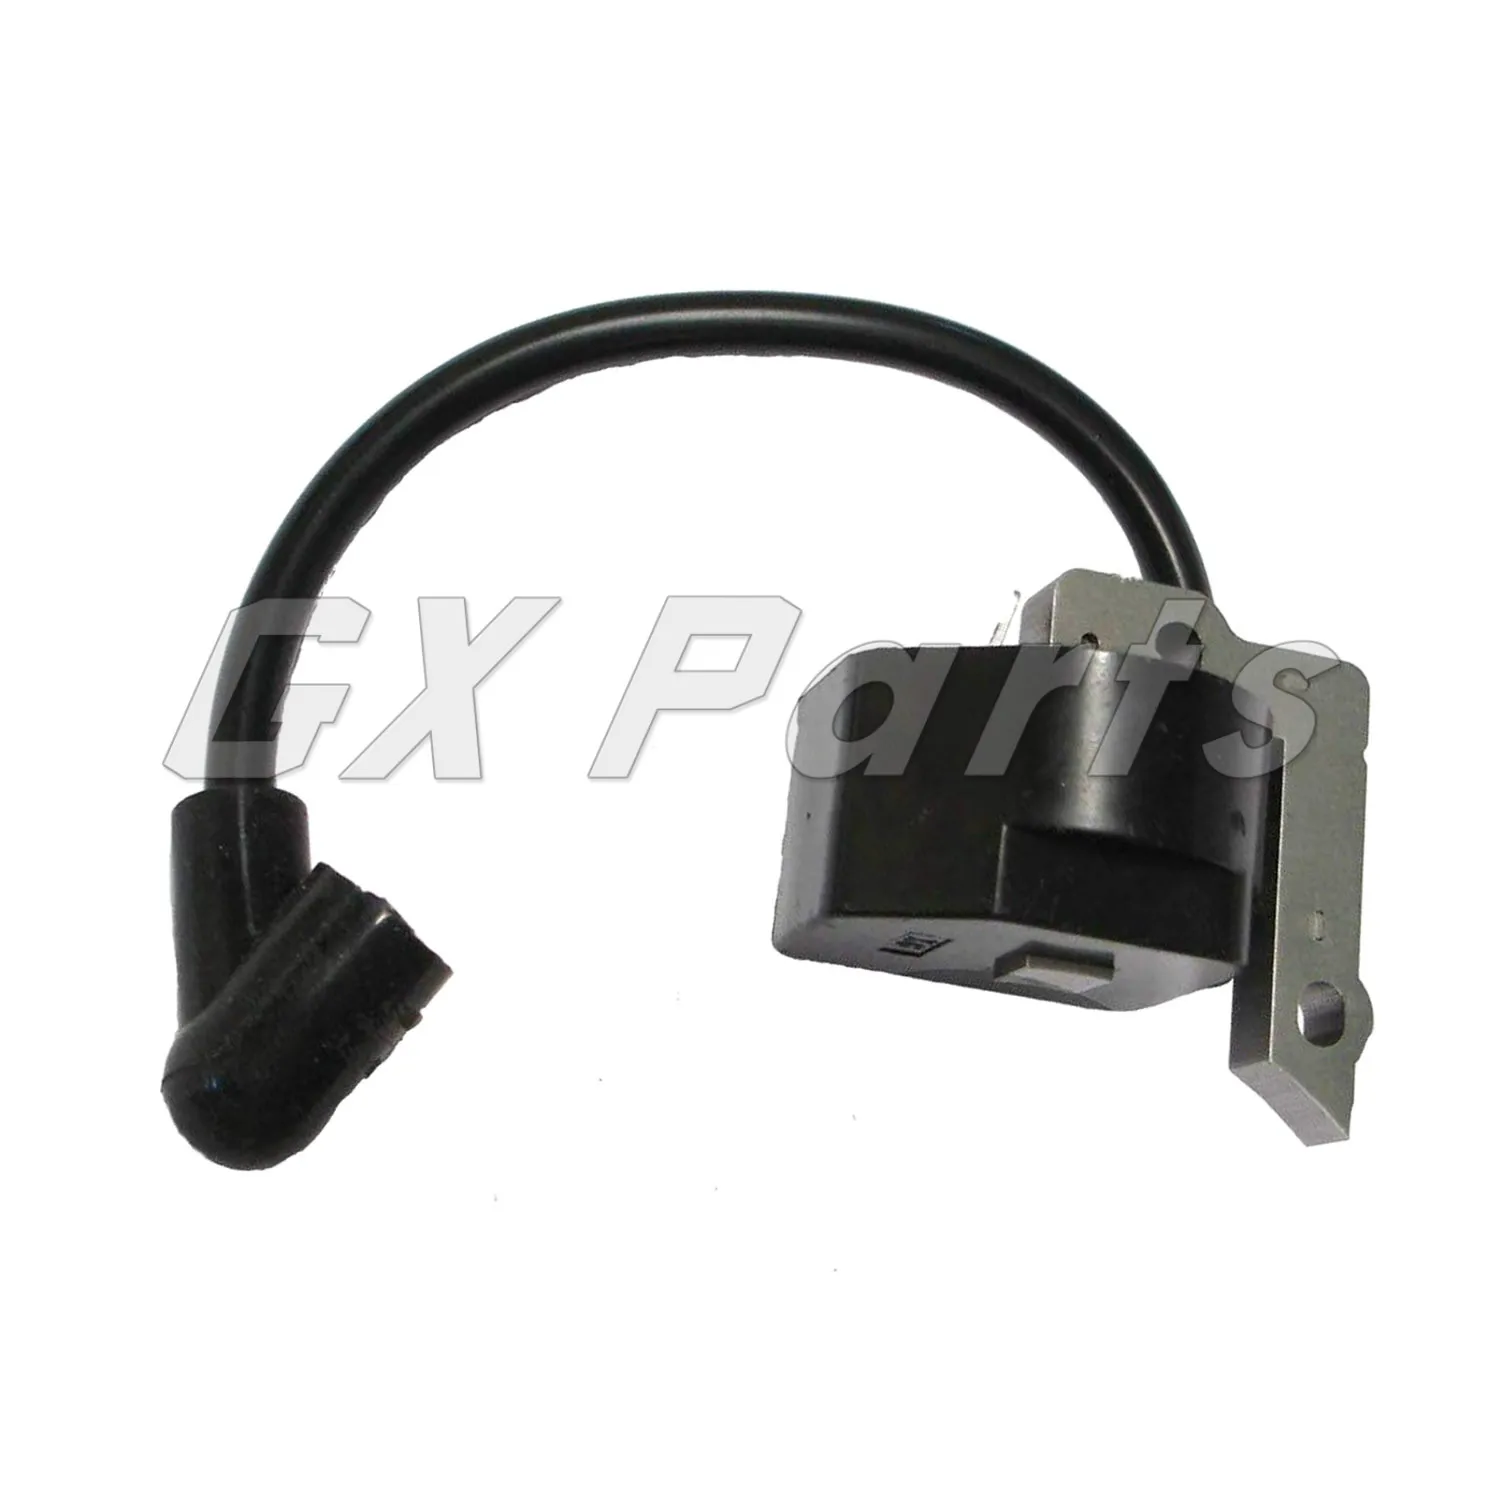 

Ignition Coil 503580501 530003014 For Husqvarna 40 45 49 Jonsered 2041 2045 2050 Partner P400 P450 P460 P462 P490 P510 Chainsaw